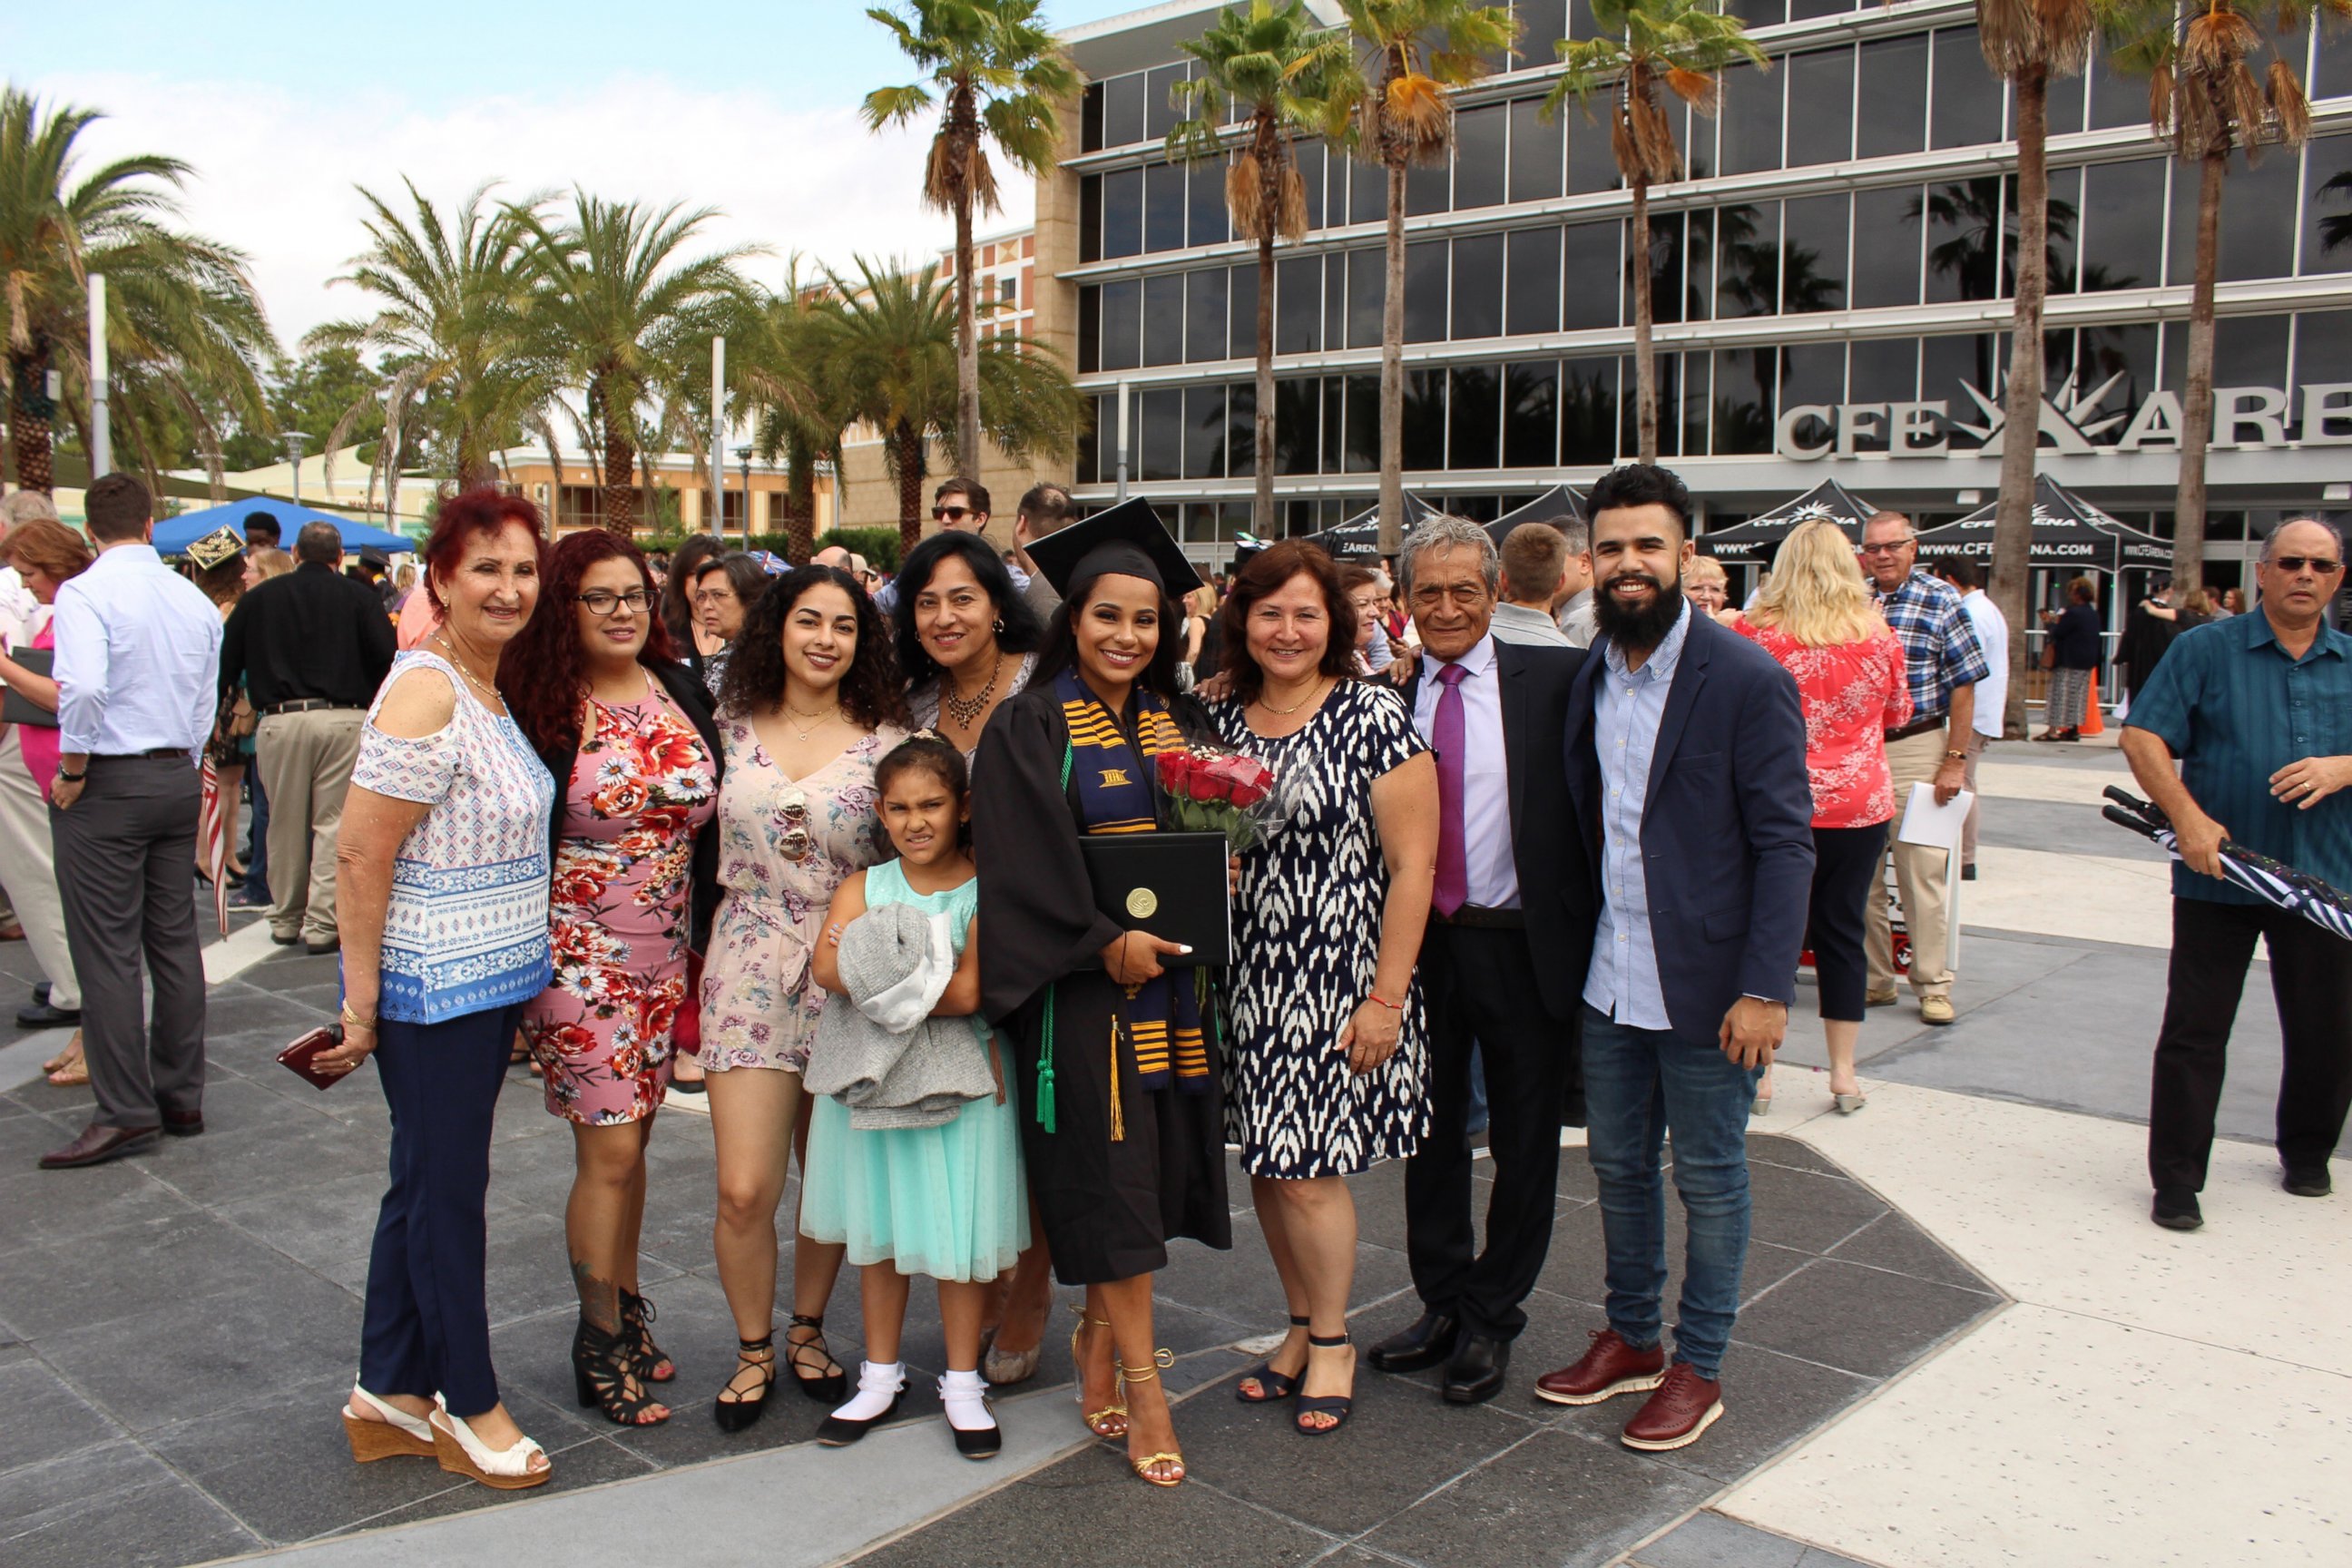 PHOTO: Melanie Sanchez, a 2017 graduate of University of Central Florida, with her family at the school's graduation on May 5, 2017.